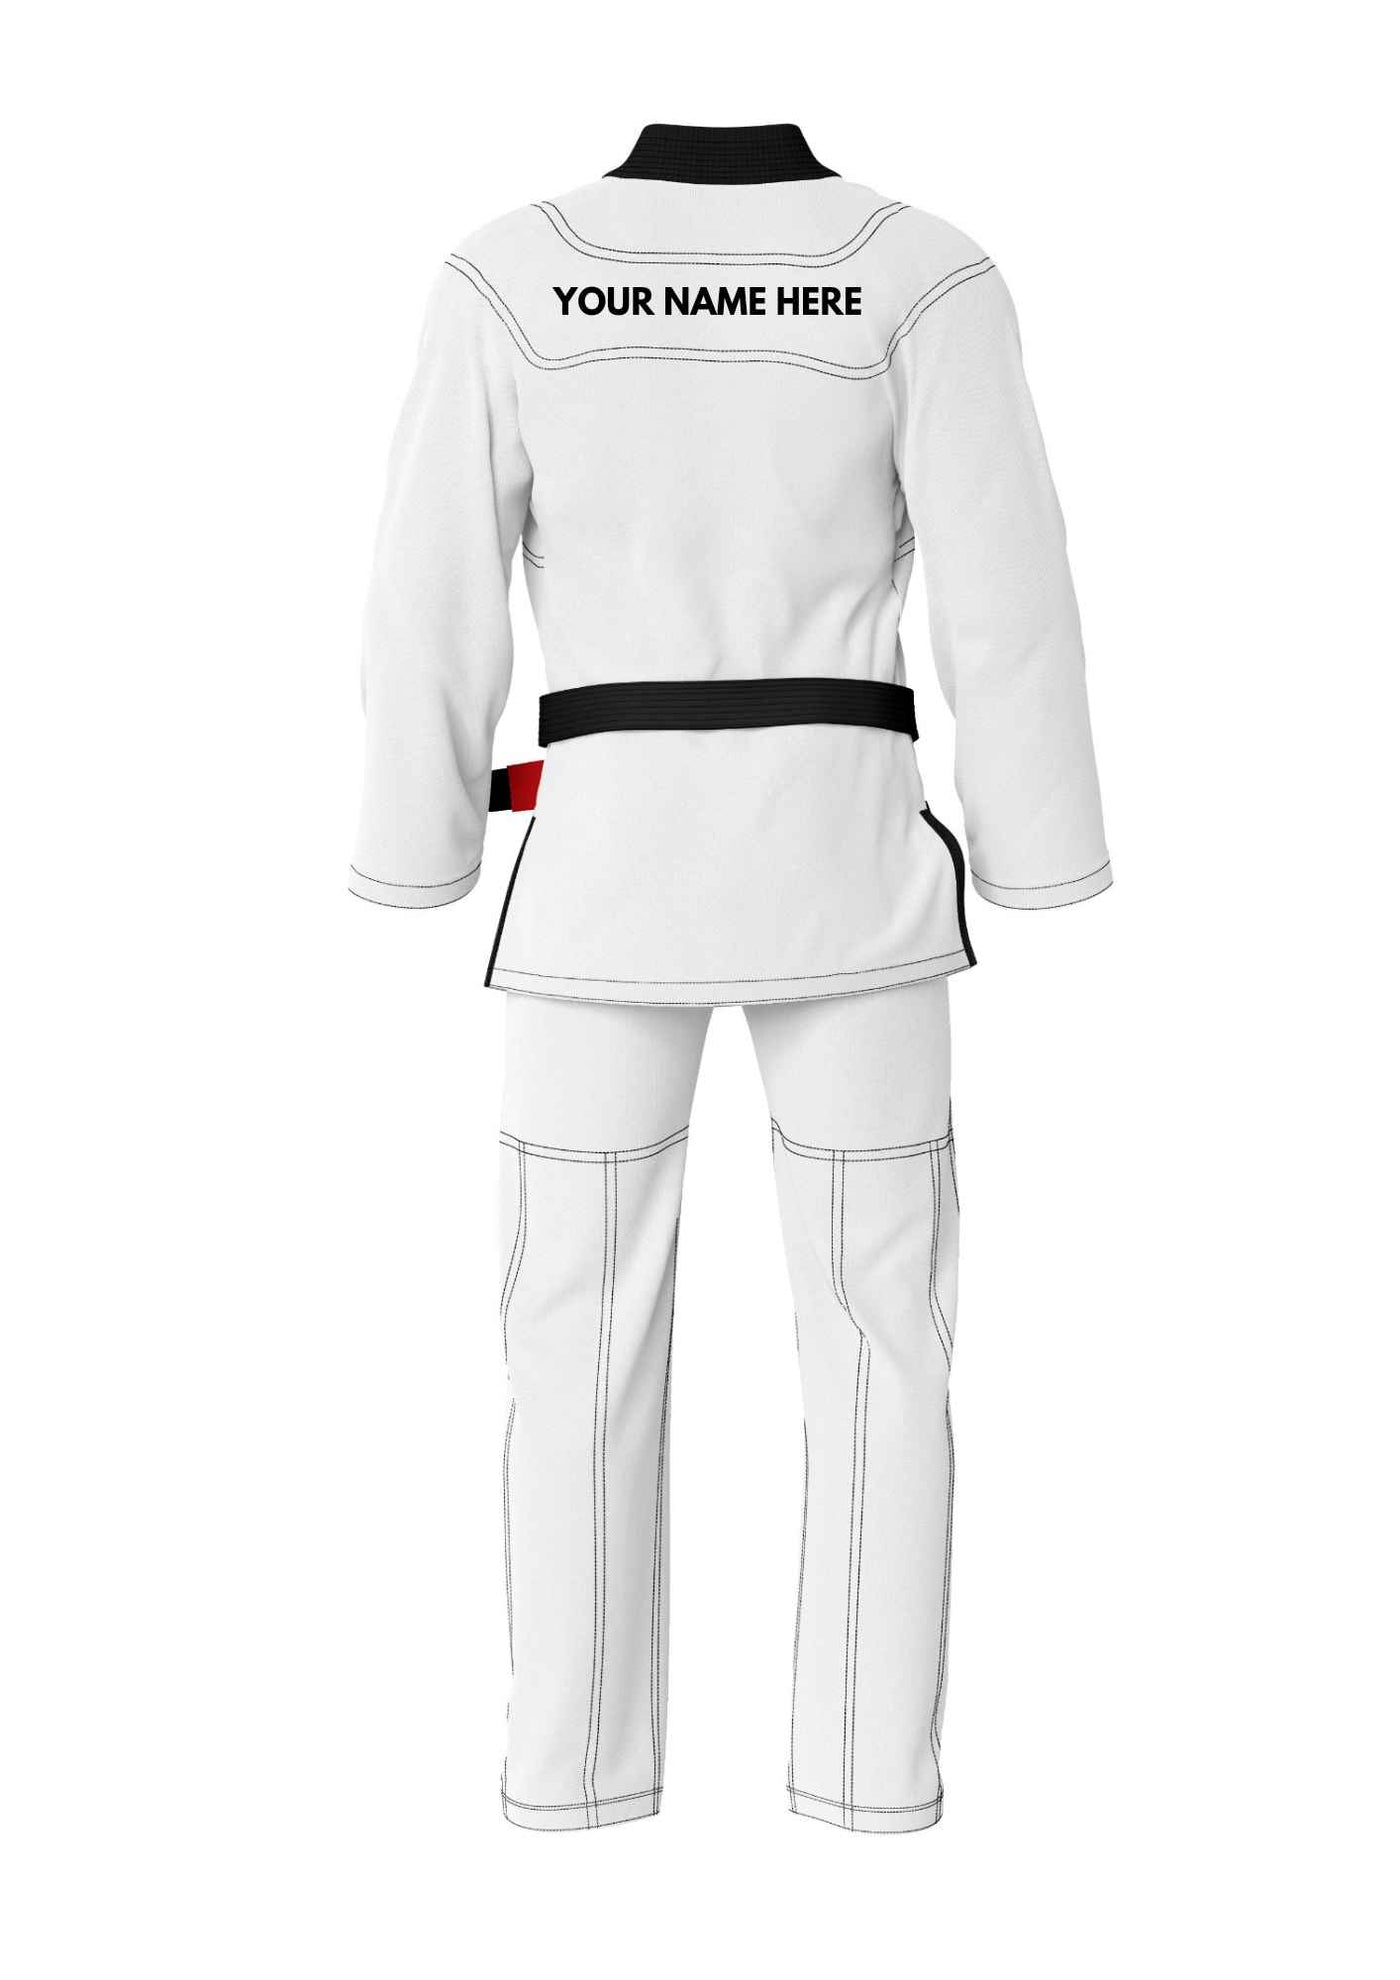 Best Fitted Bjj Gi back 